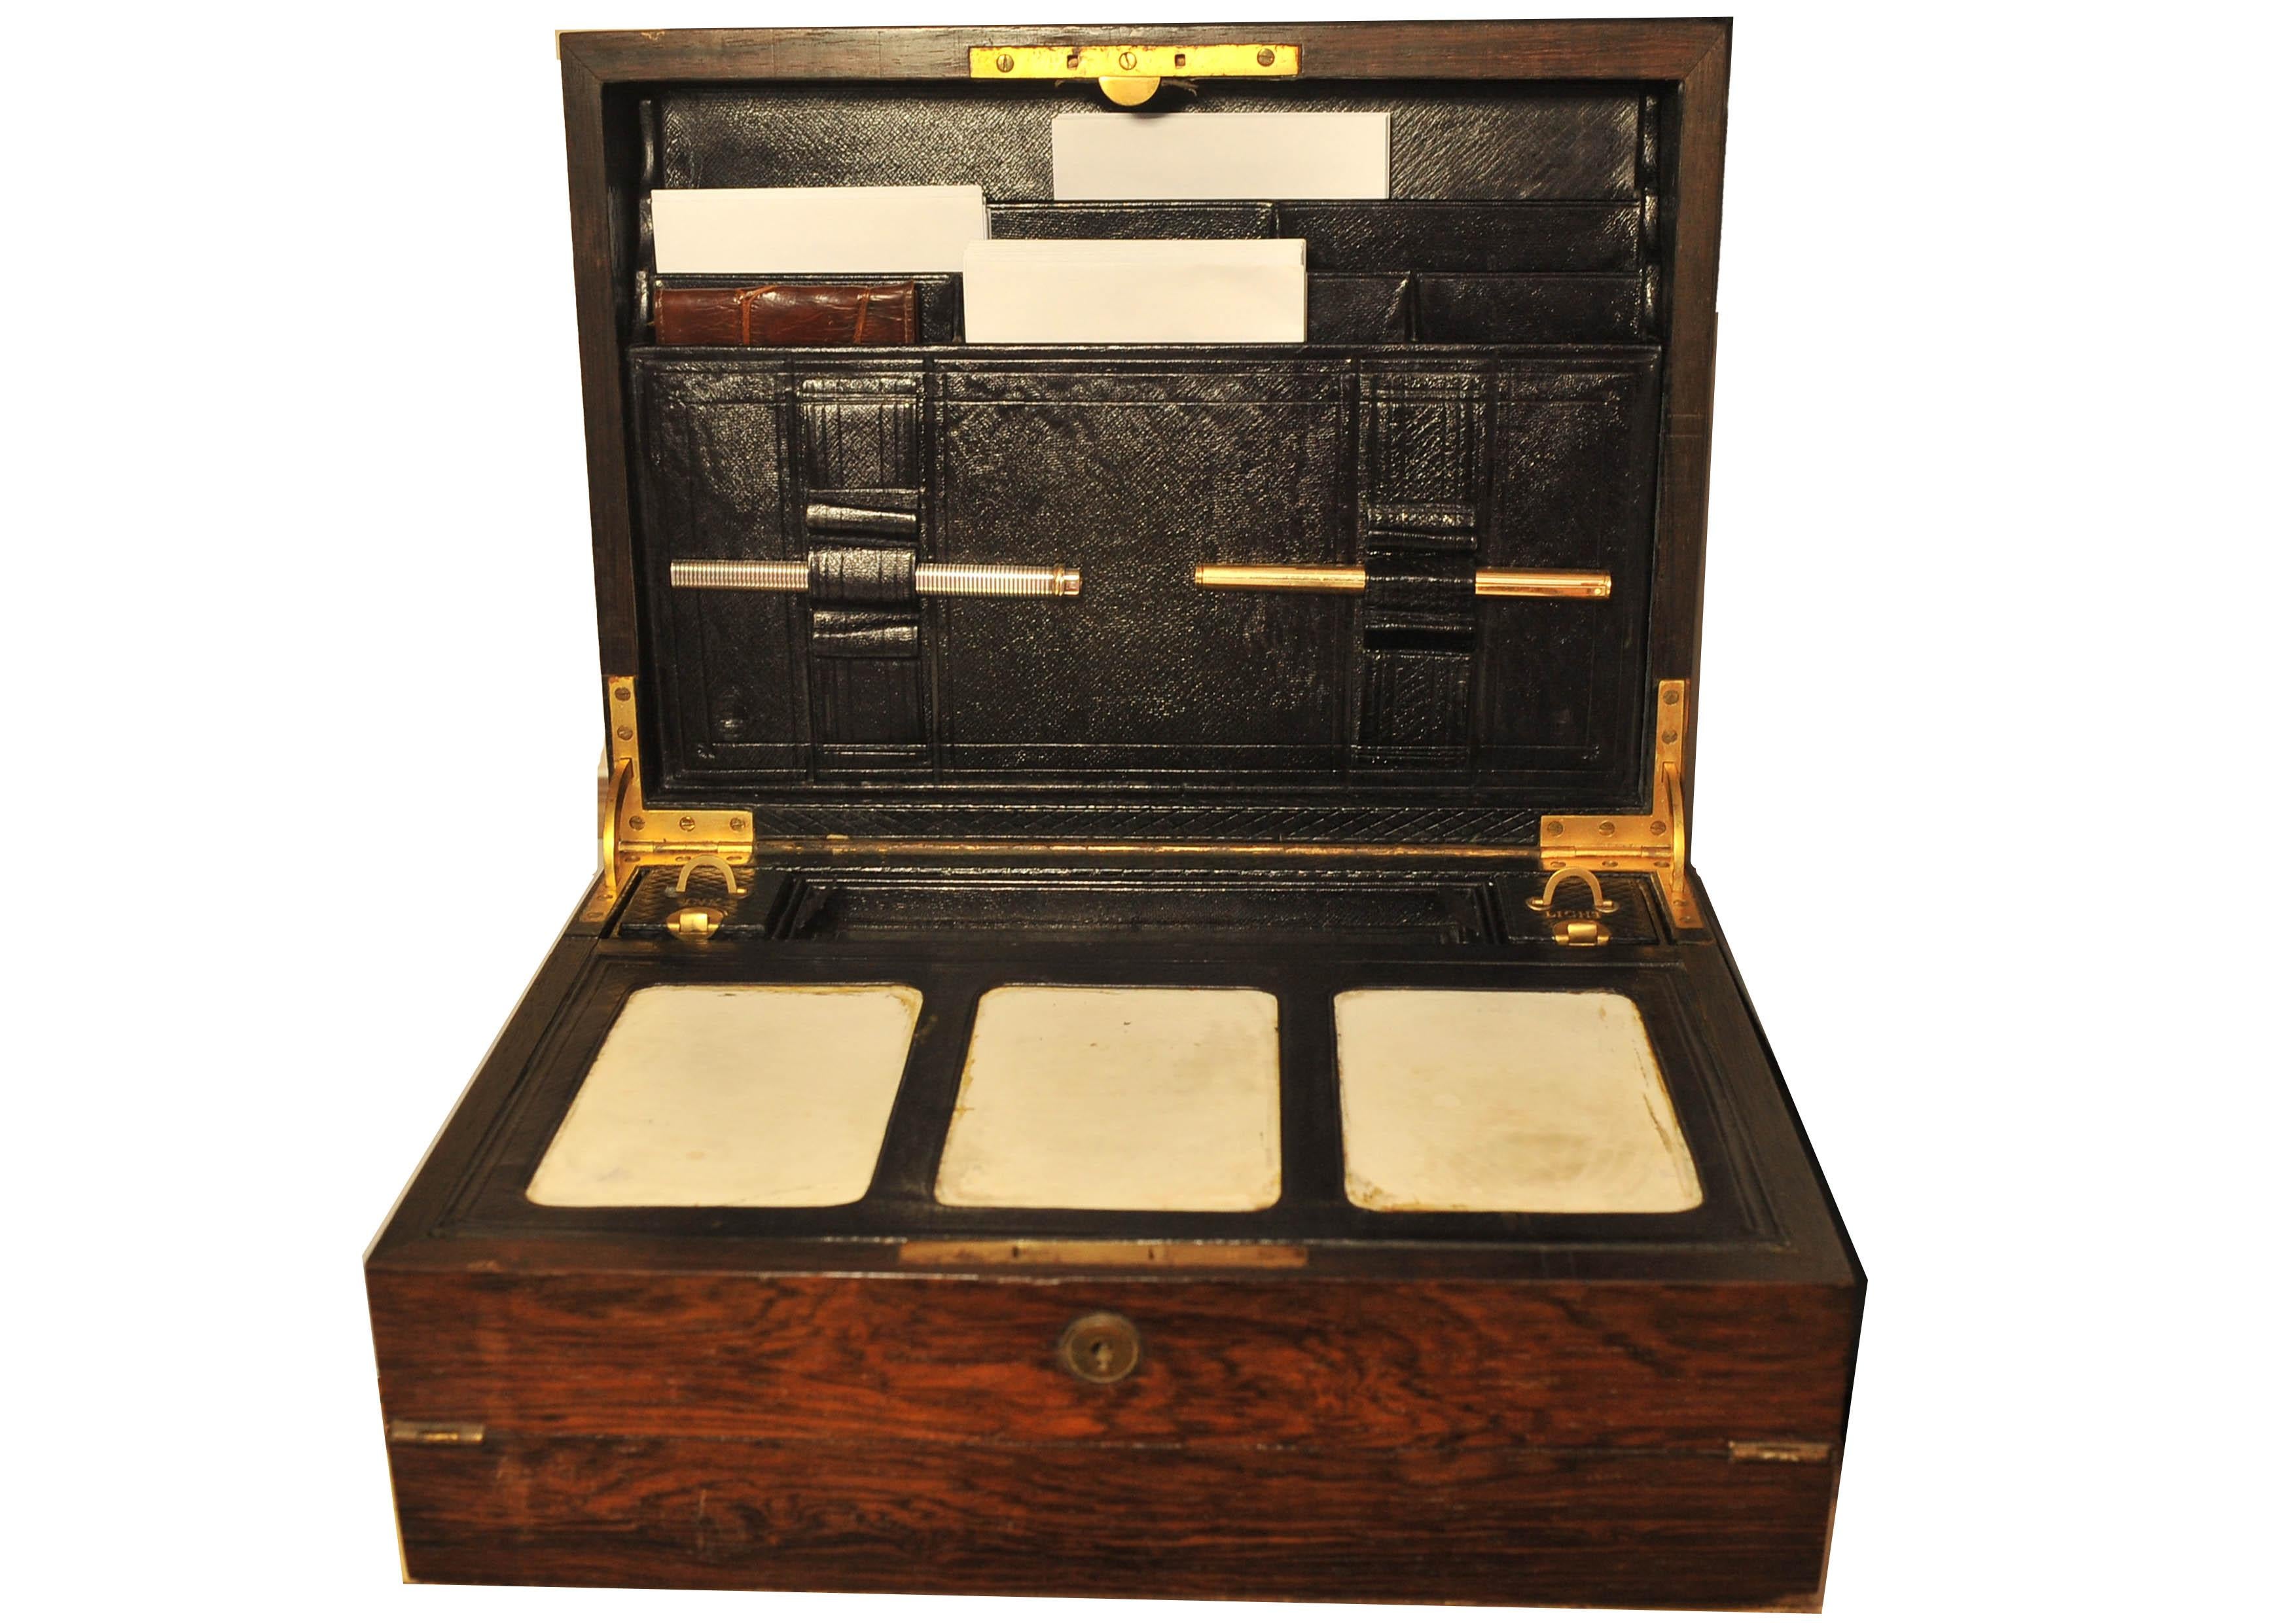 A Beautiful & Luxurious Handcrafted Regency Bramah Rosewood Fold-out Travelling Writing Companion With Fitted Leather Interior, Ceramic Blotting Tablets.
Complete with Beautifully Designed inkwell and match-striker for light. New notepad pad, Quill